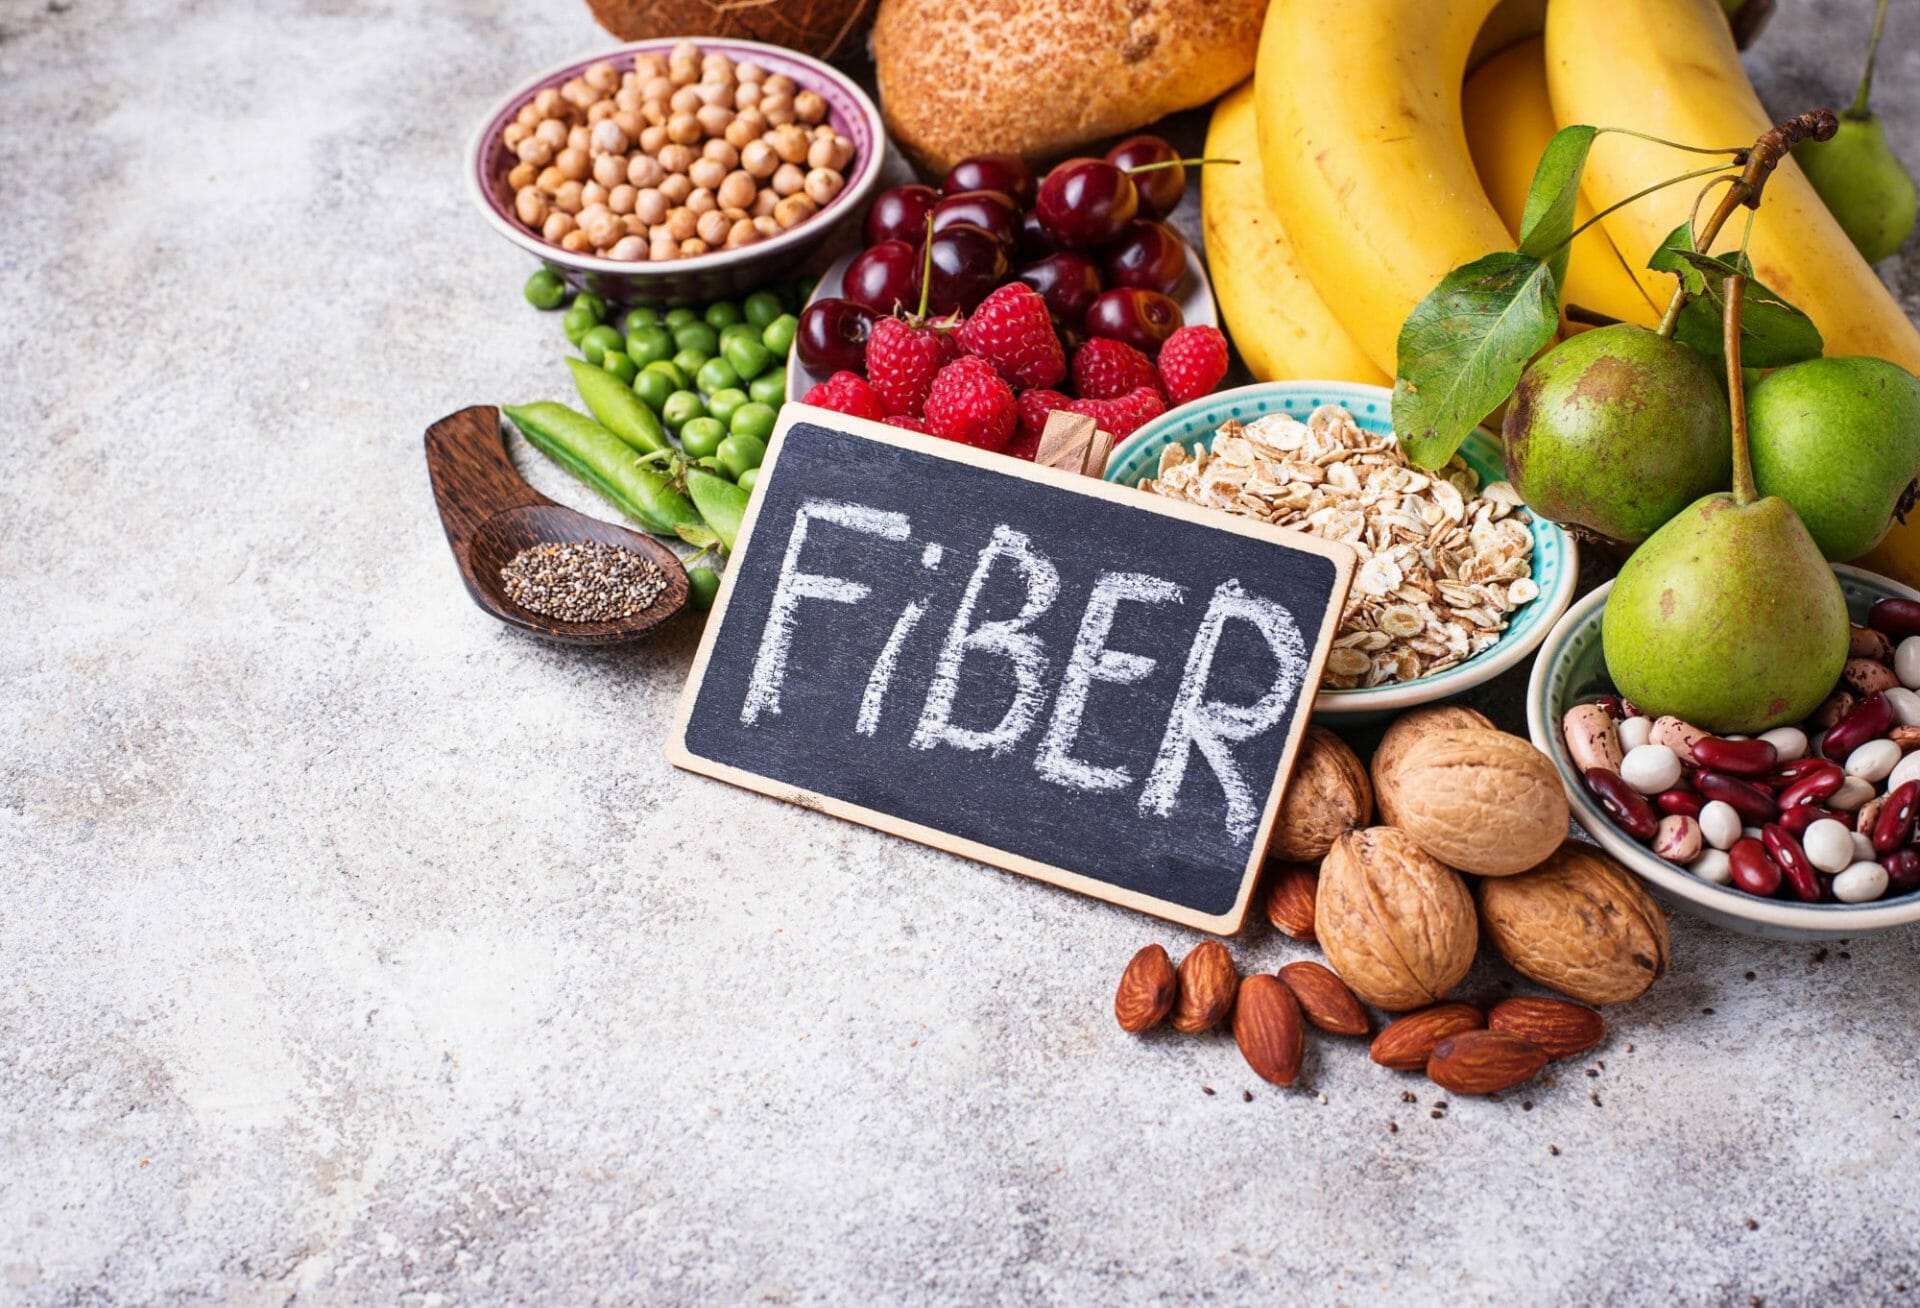 Fiber: What do I need to know?